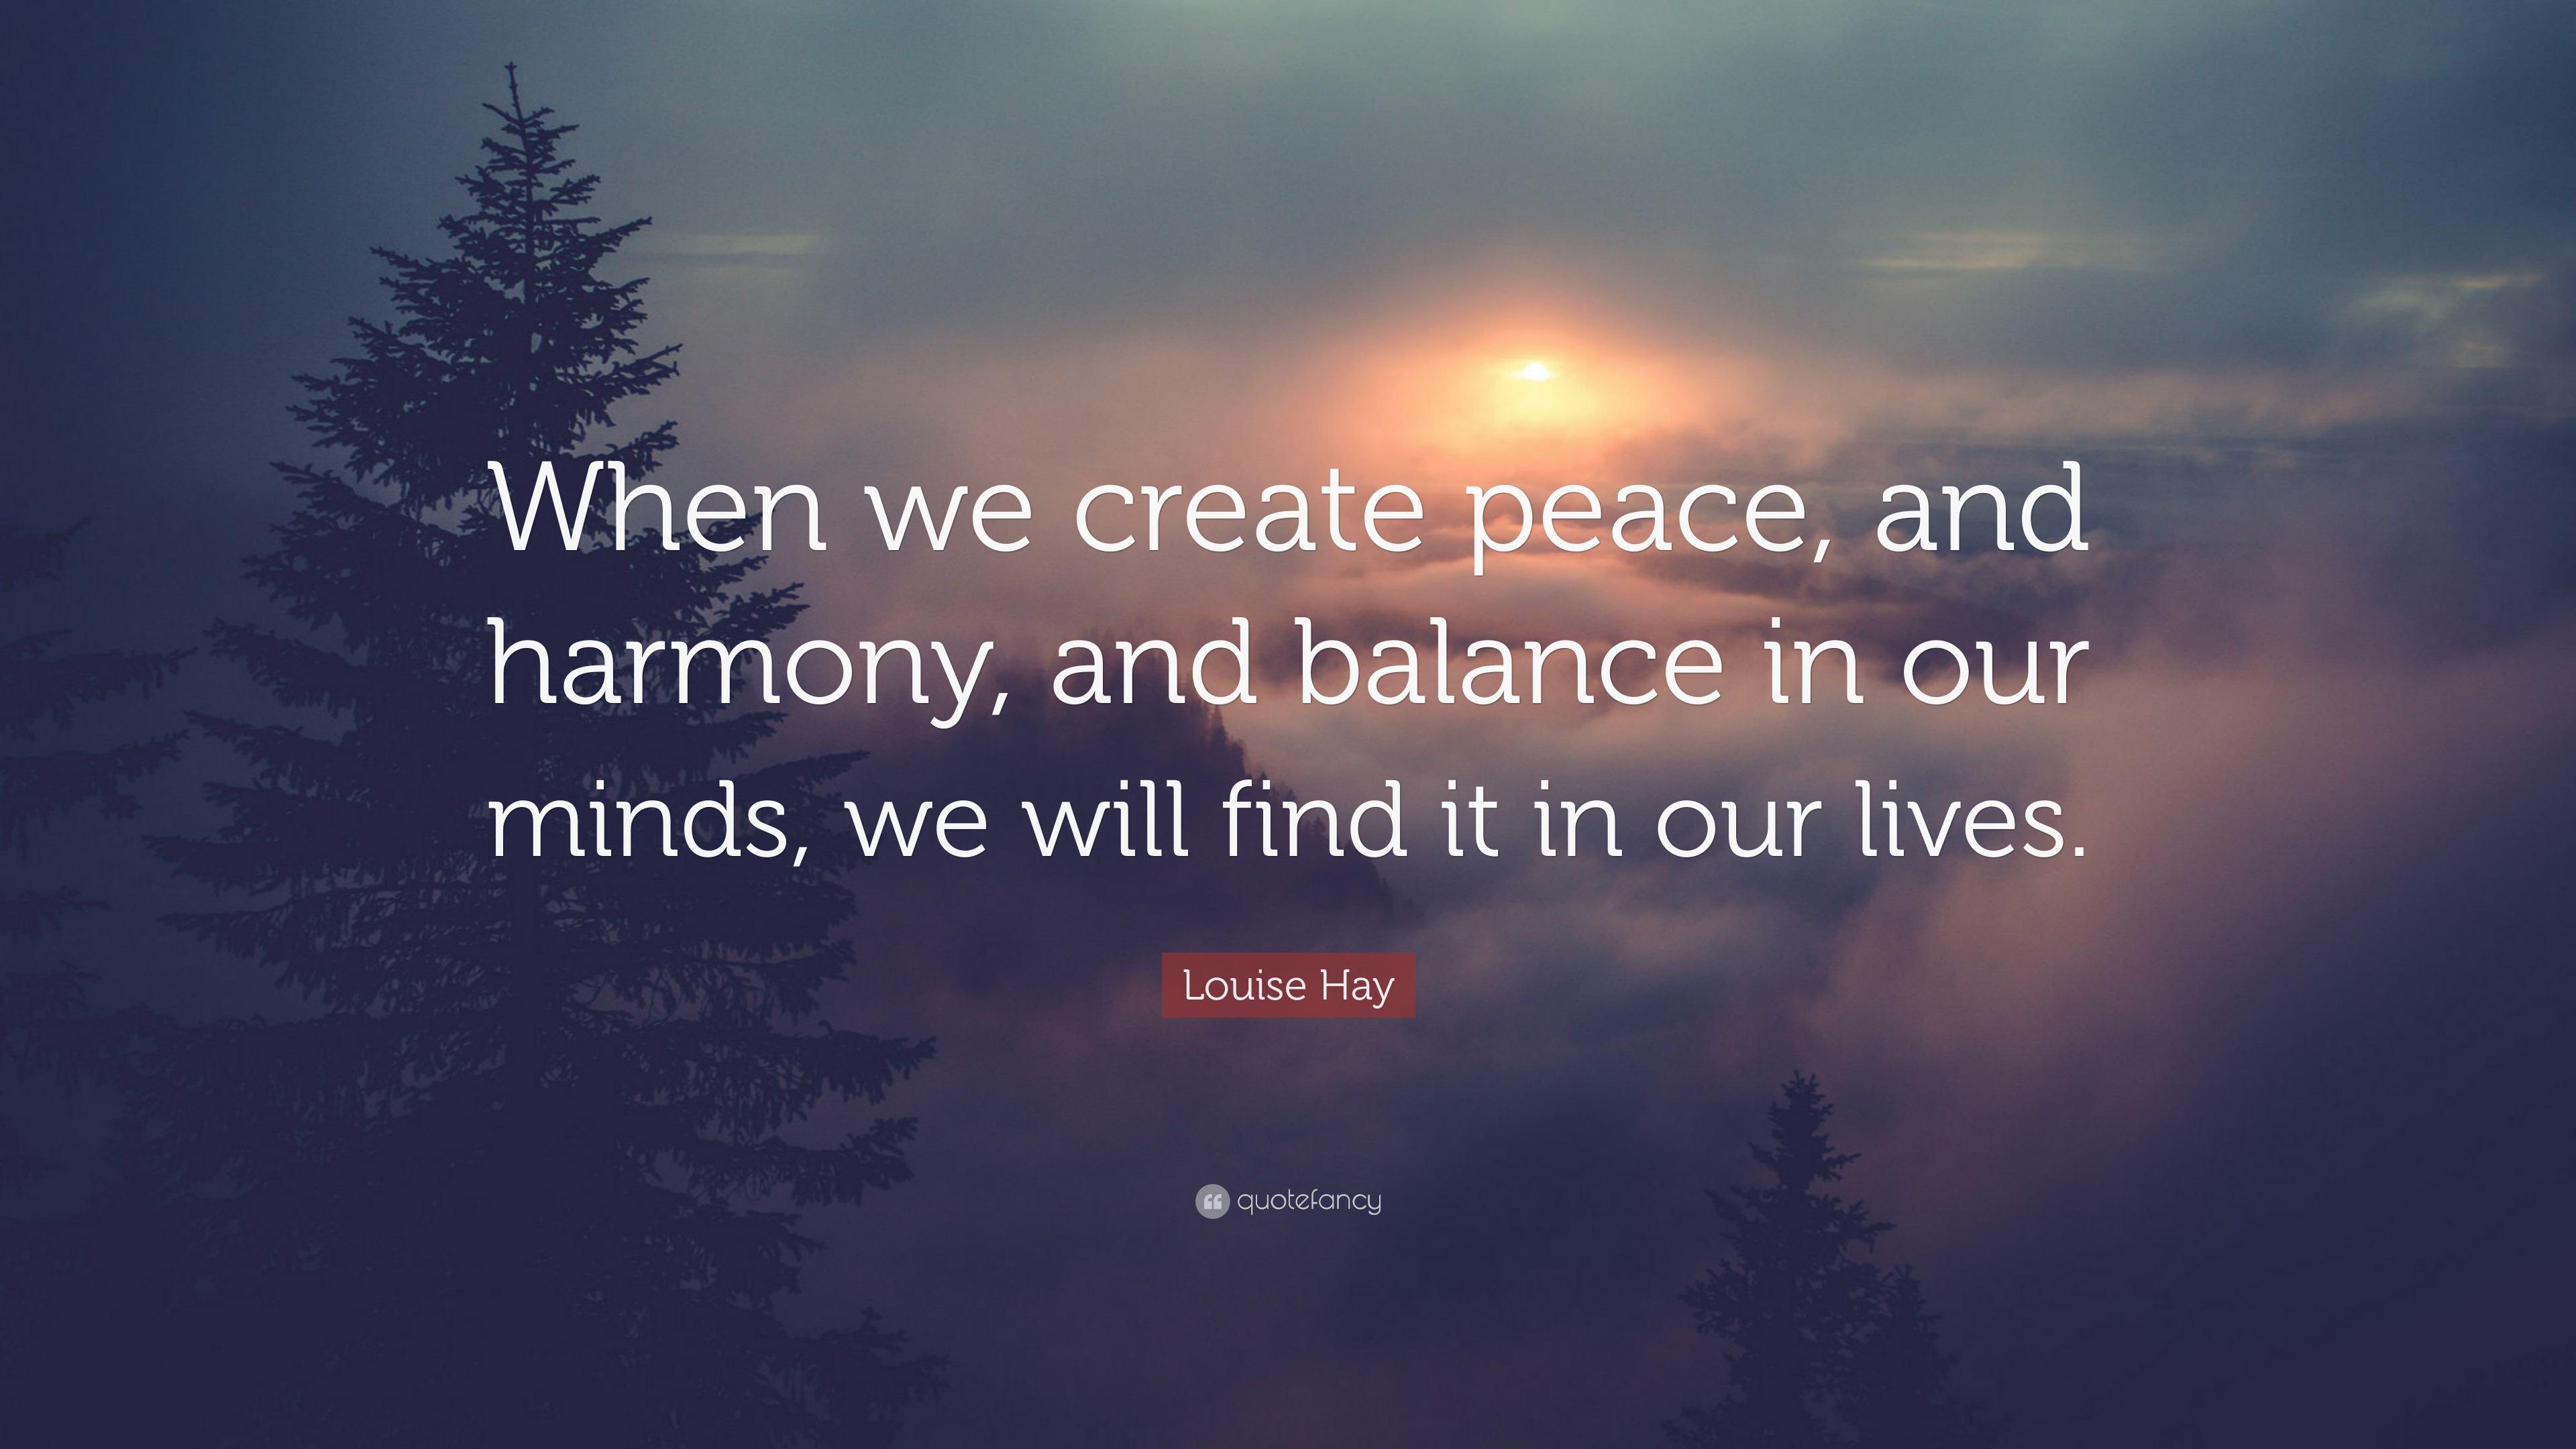 Louise Hay Quote: “When we create peace, and harmony, and balance in